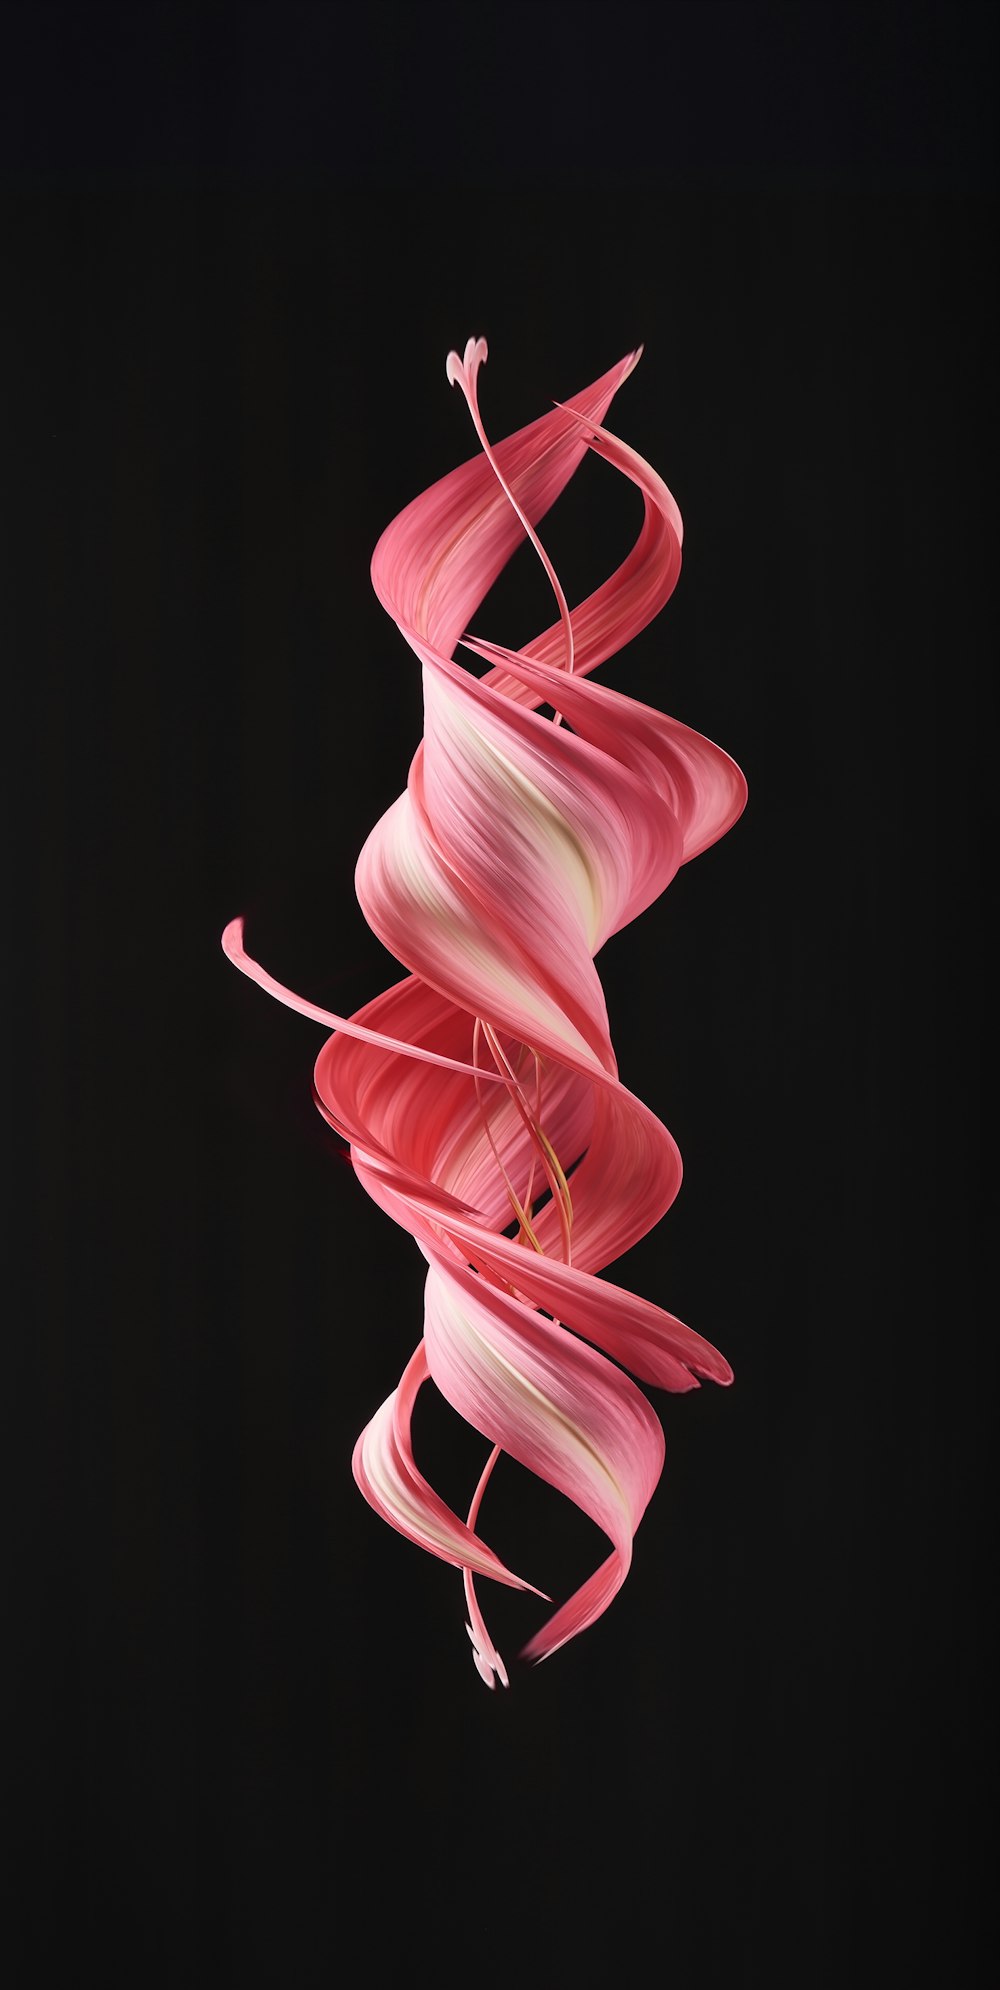 a spiral of pink hair on a black background